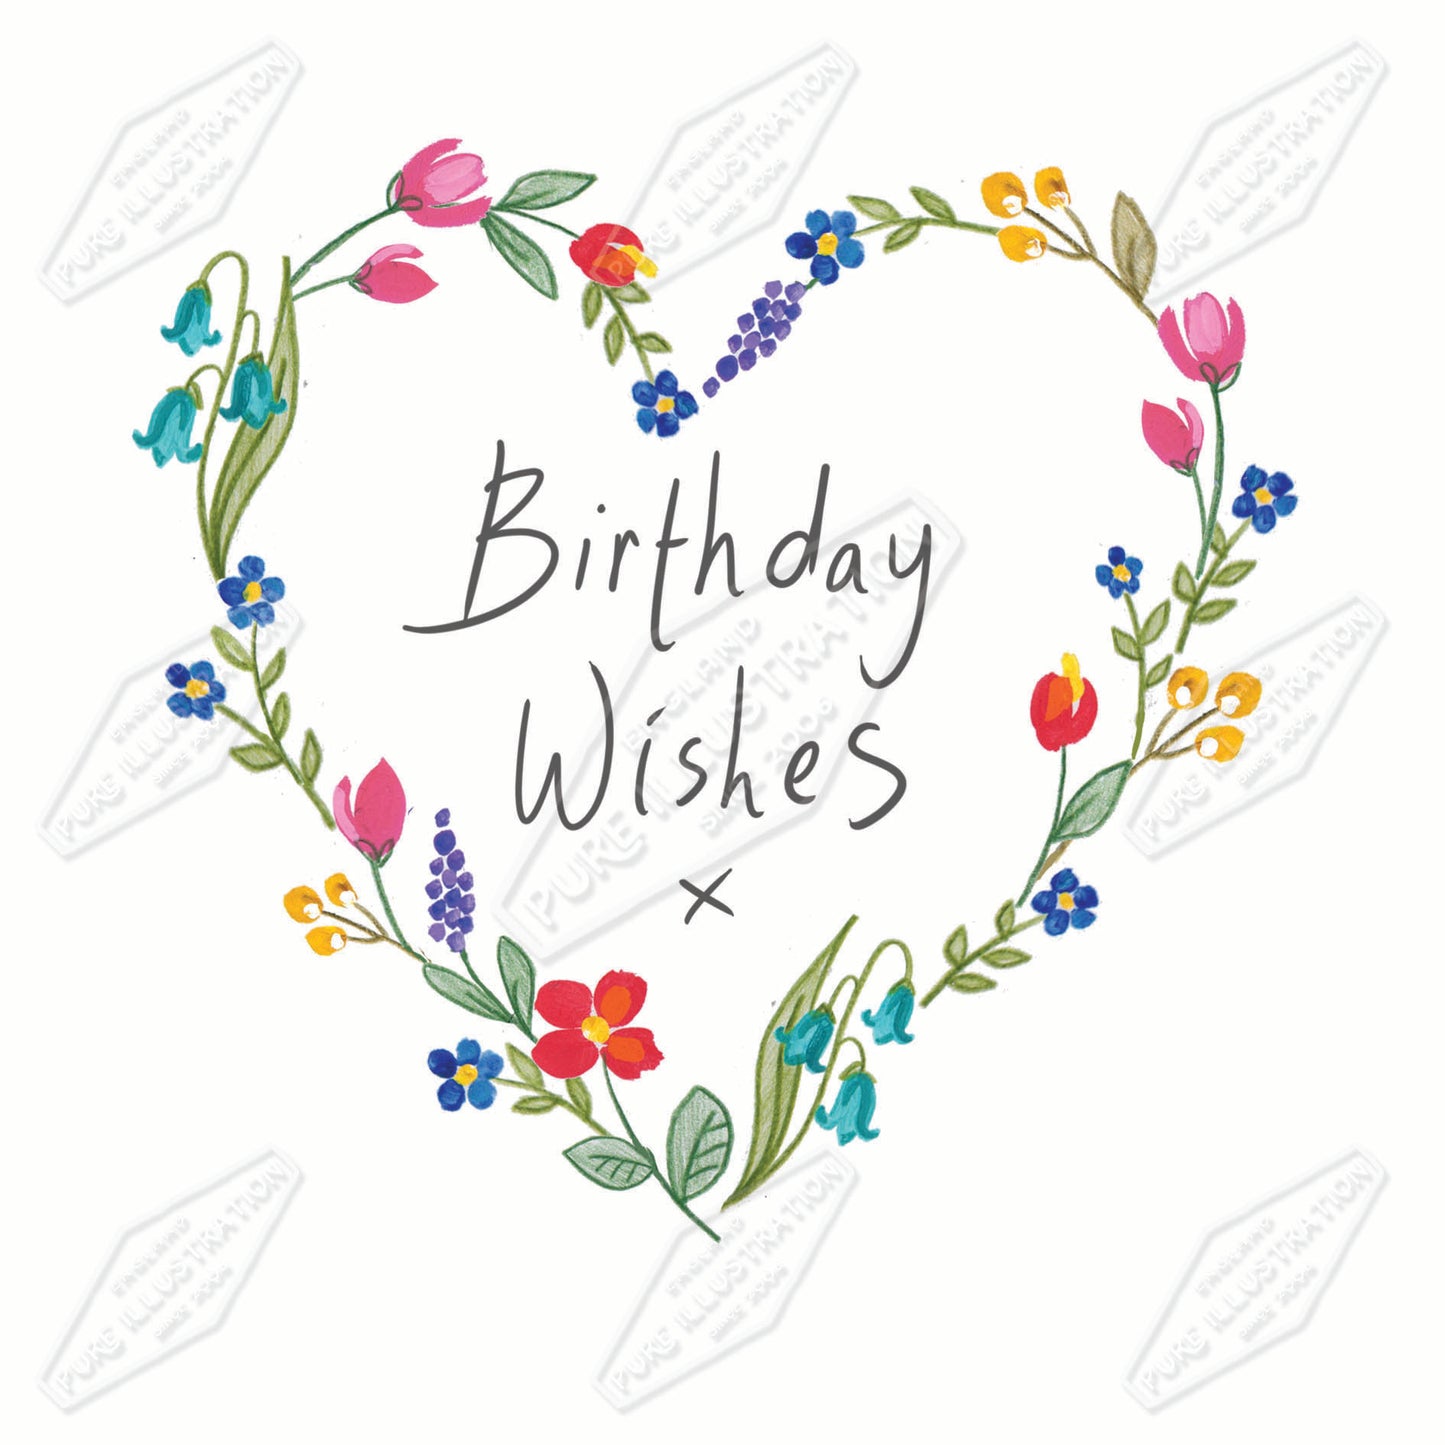 00035753AMA - Ally Marie is represented by Pure Art Licensing Agency - Birthday Greeting Card Design